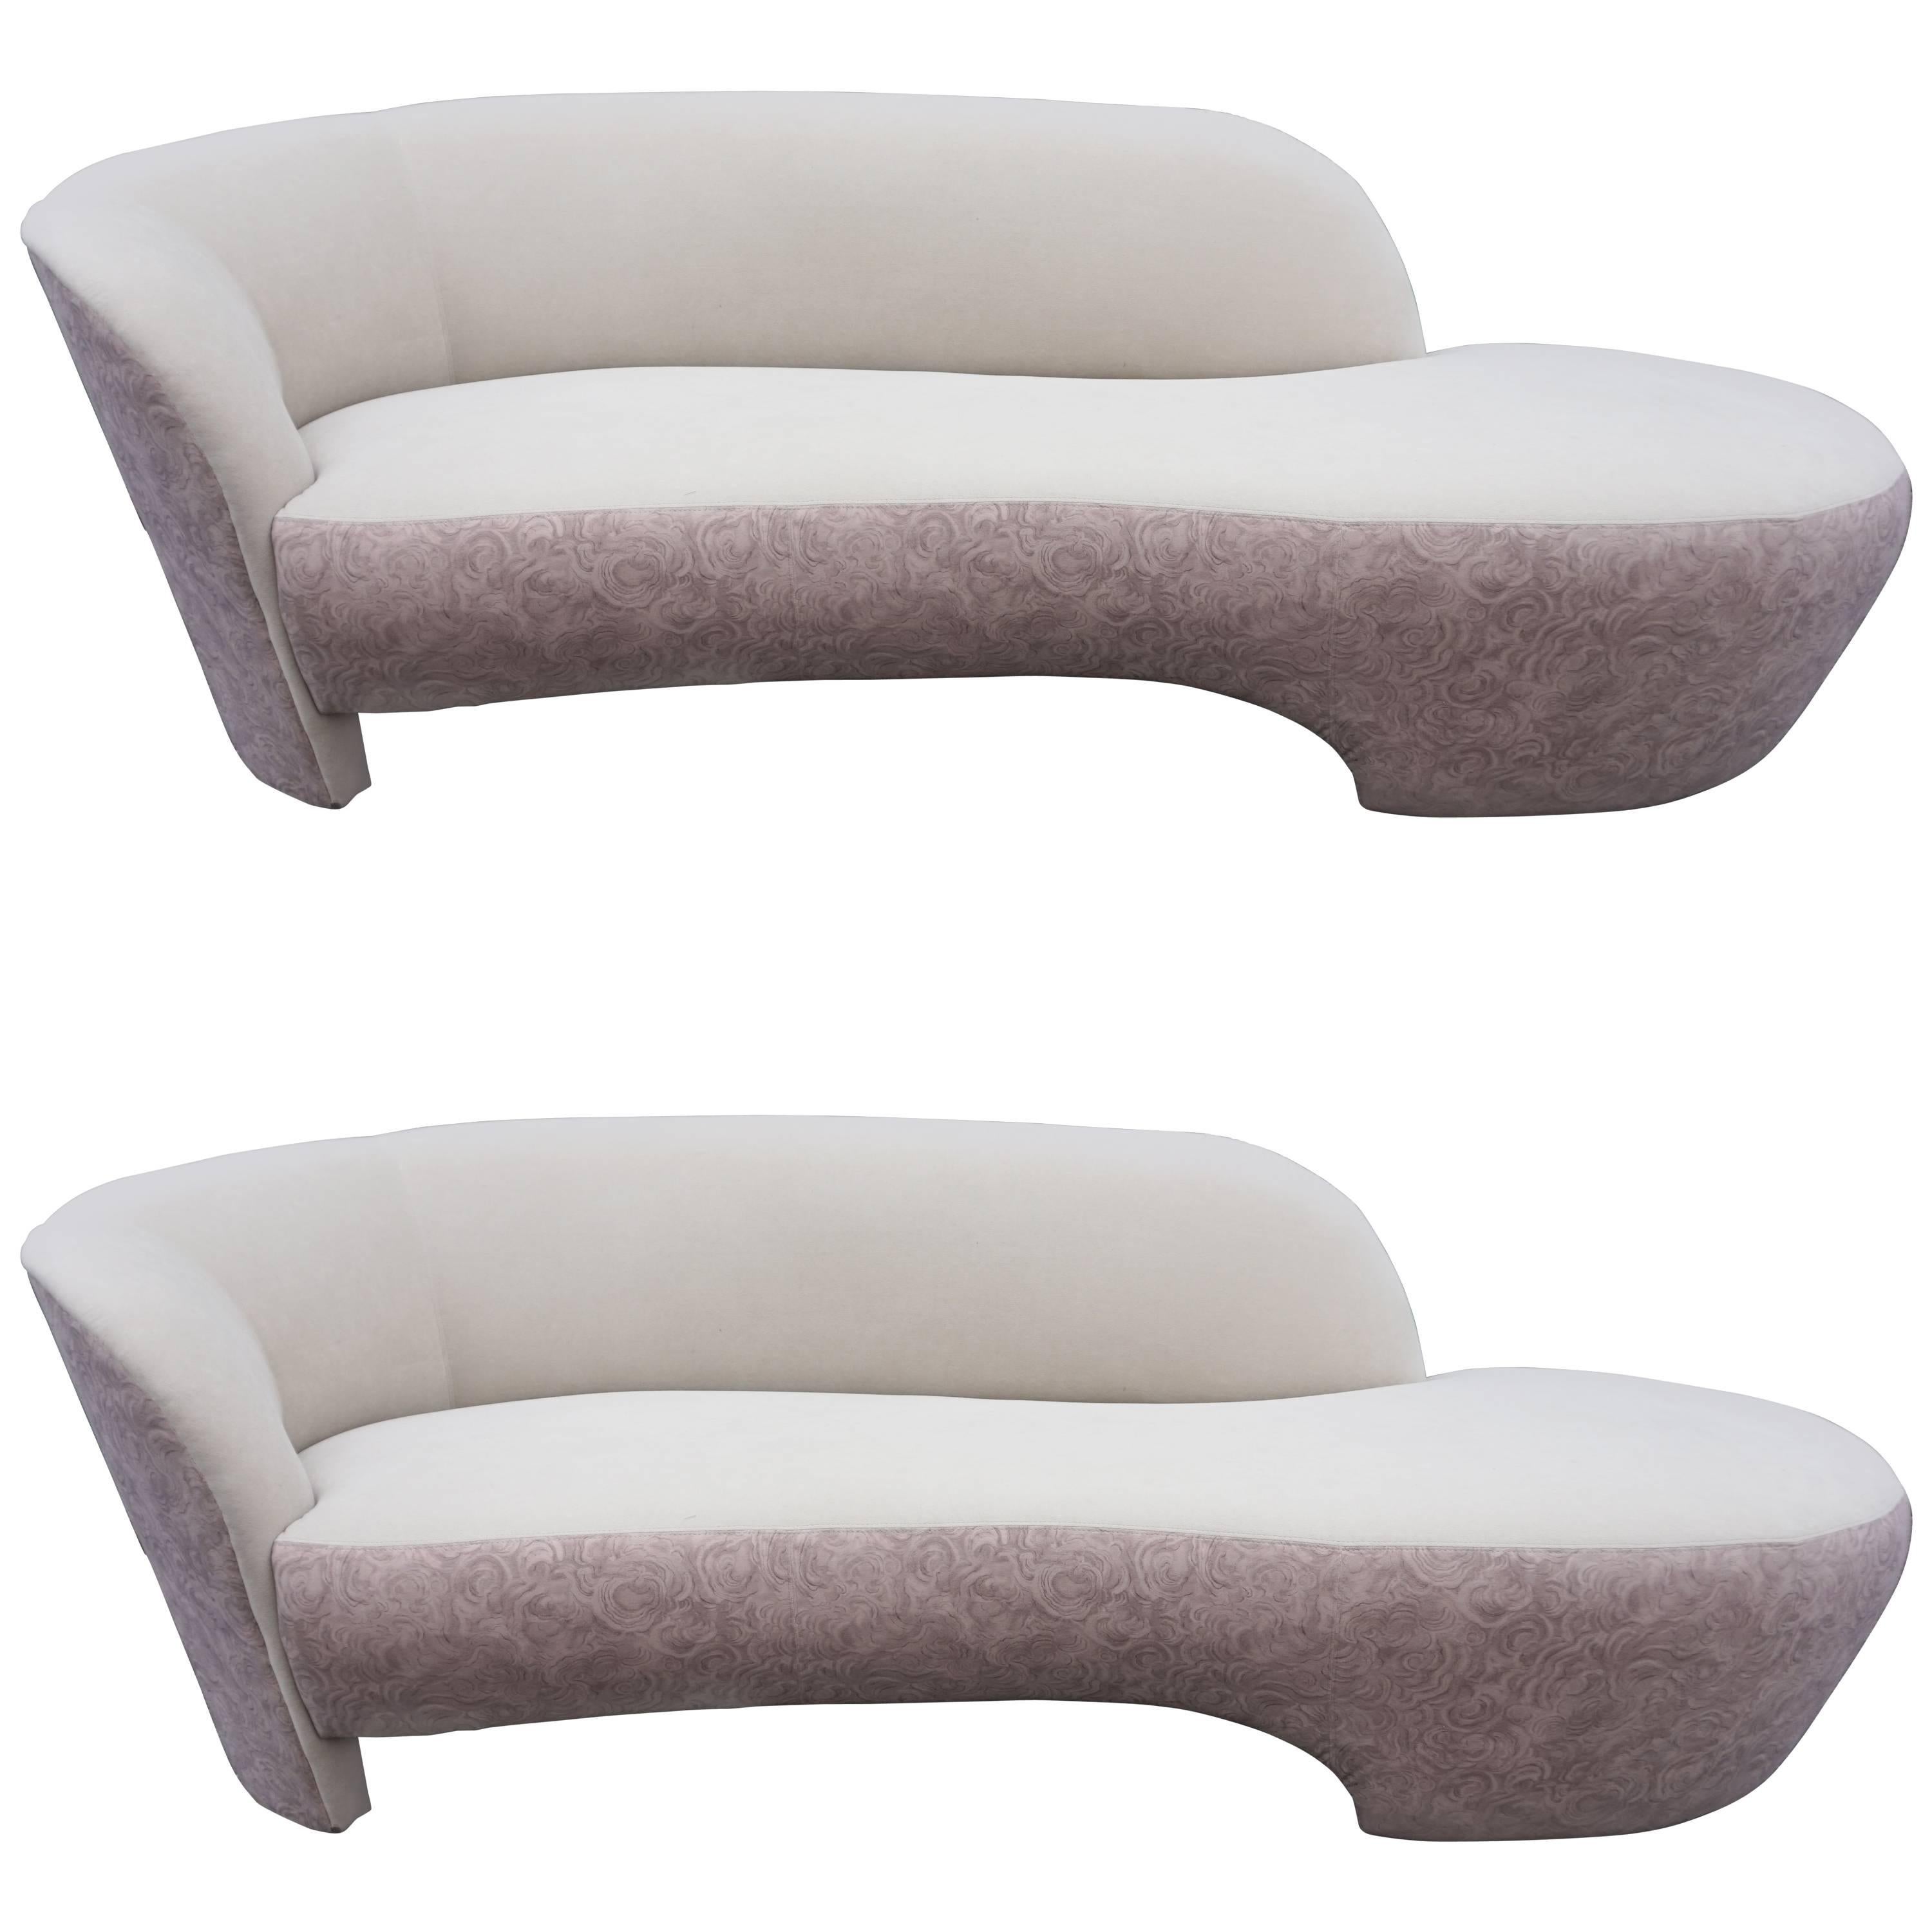 Pair of Vladimir Kagan Style Weiman Preview Kidney Shaped Sofas